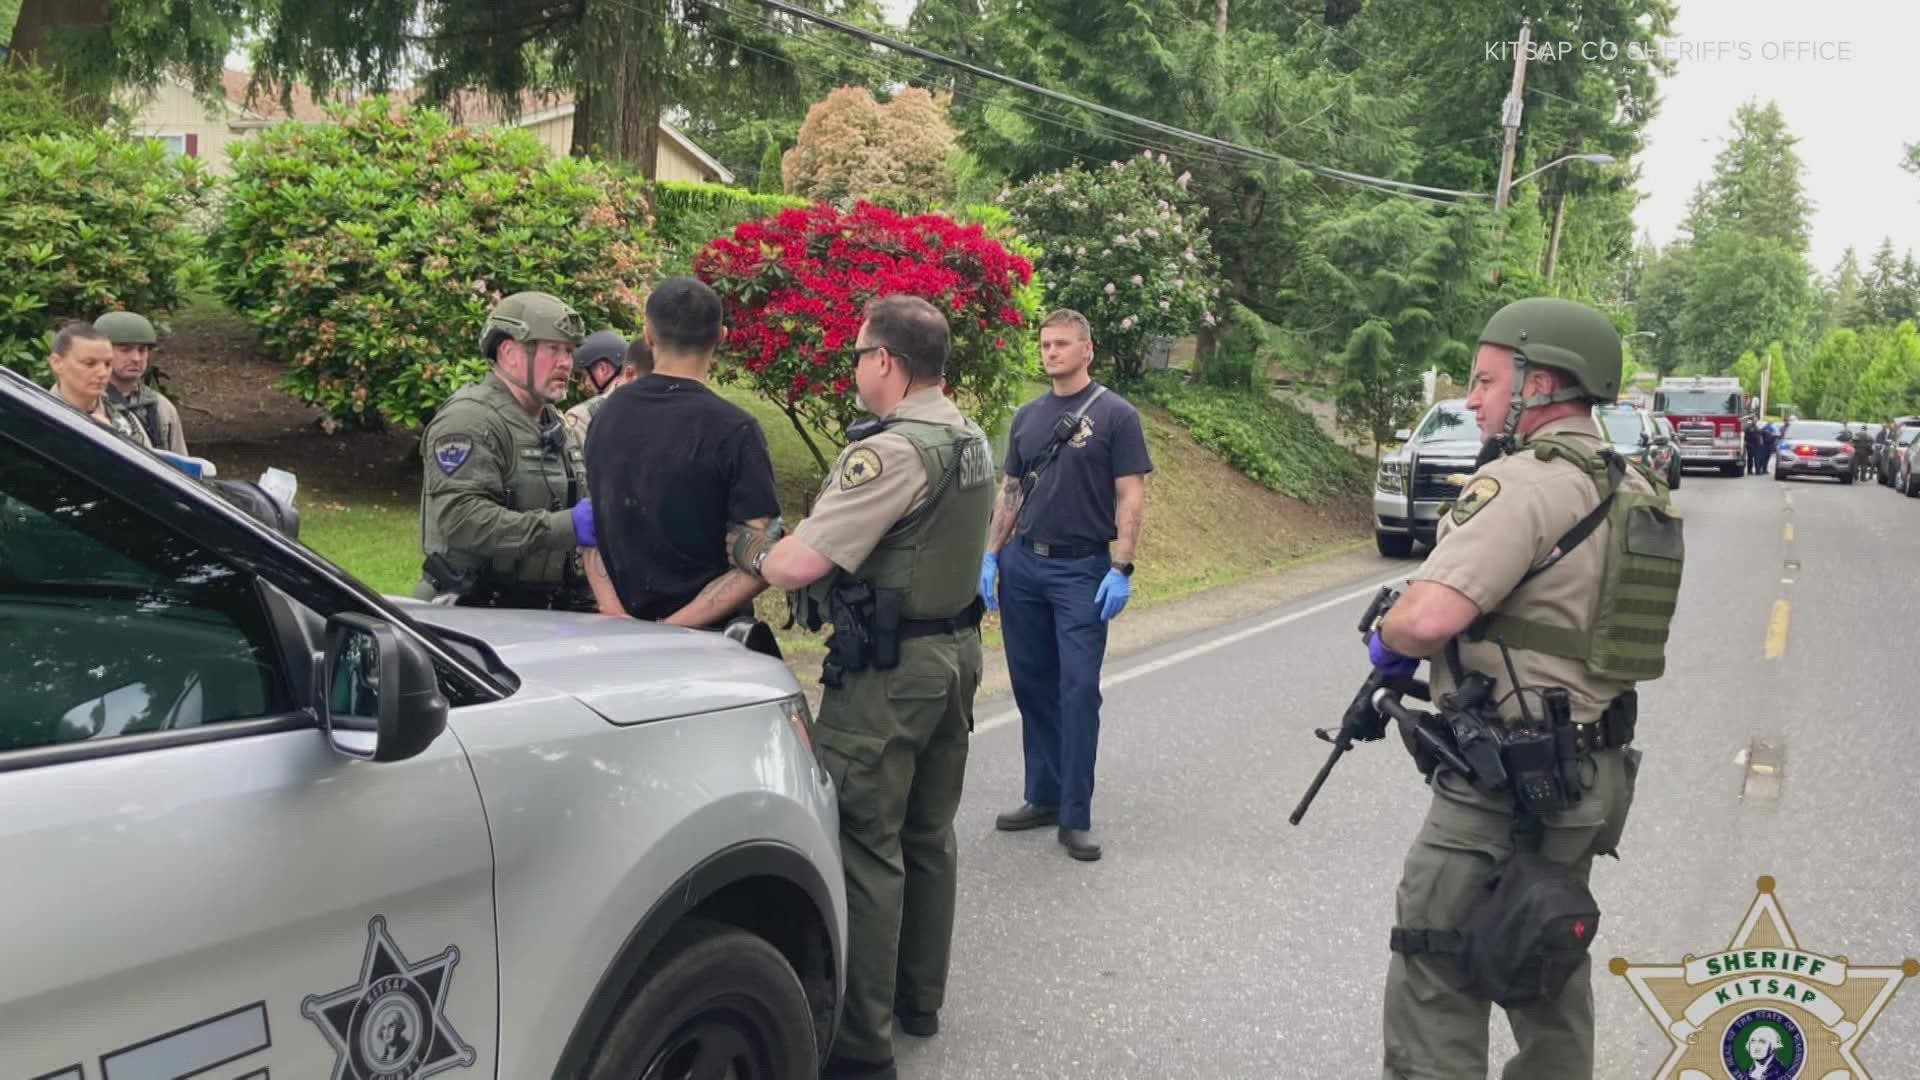 Deputies found a deceased man in a residence and a second man barricaded and armed with a rifle, according to the Kitsap County Sheriff's Office.